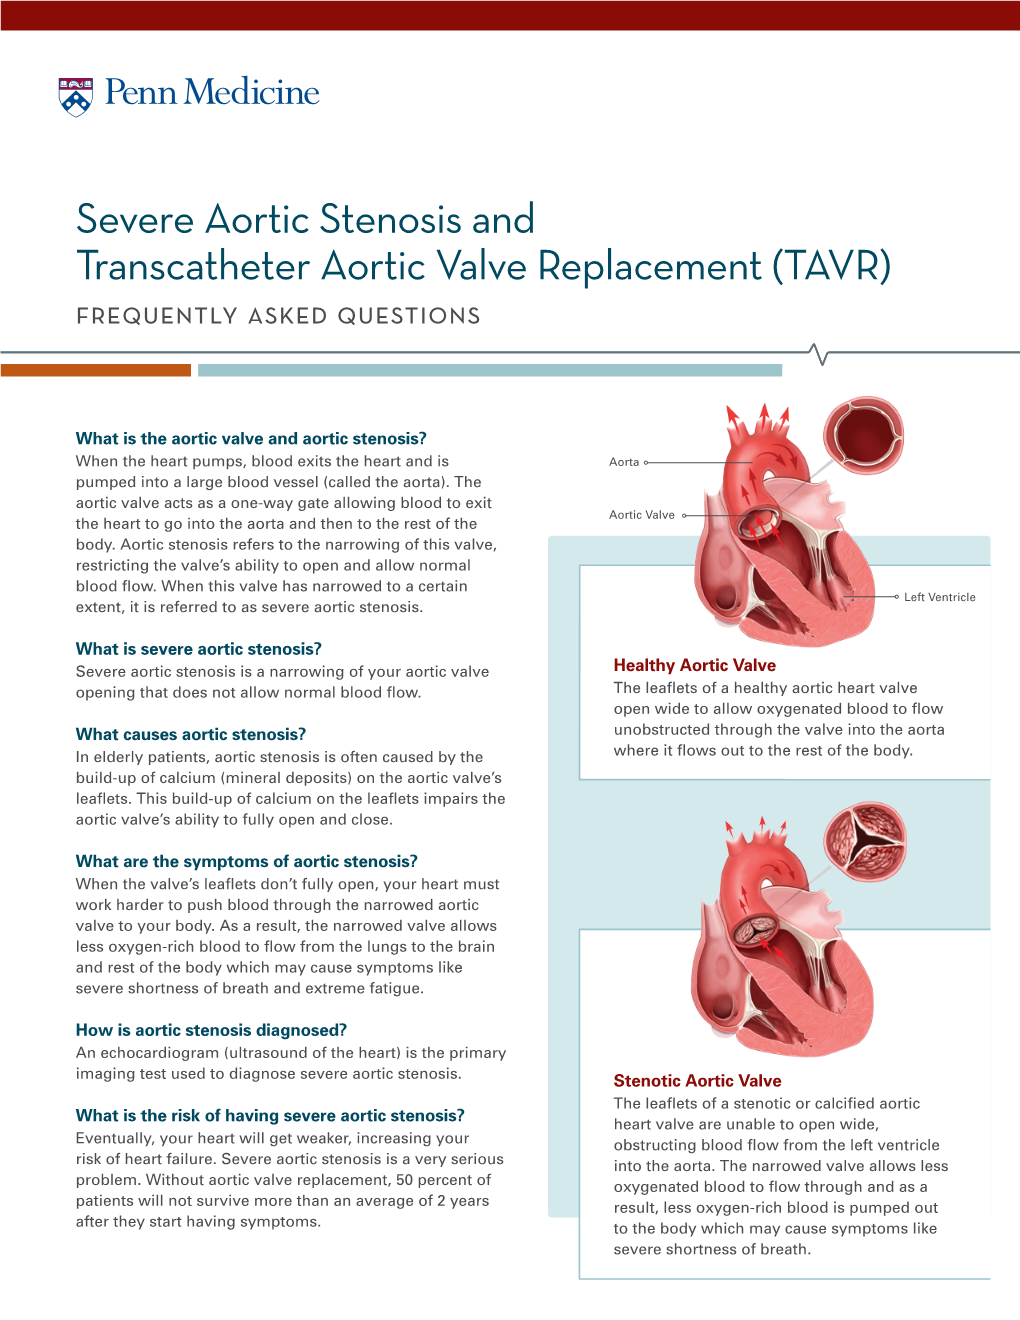 Severe Aortic Stenosis and Transcatheter Aortic Valve Replacement (TAVR) Frequently Asked Questions